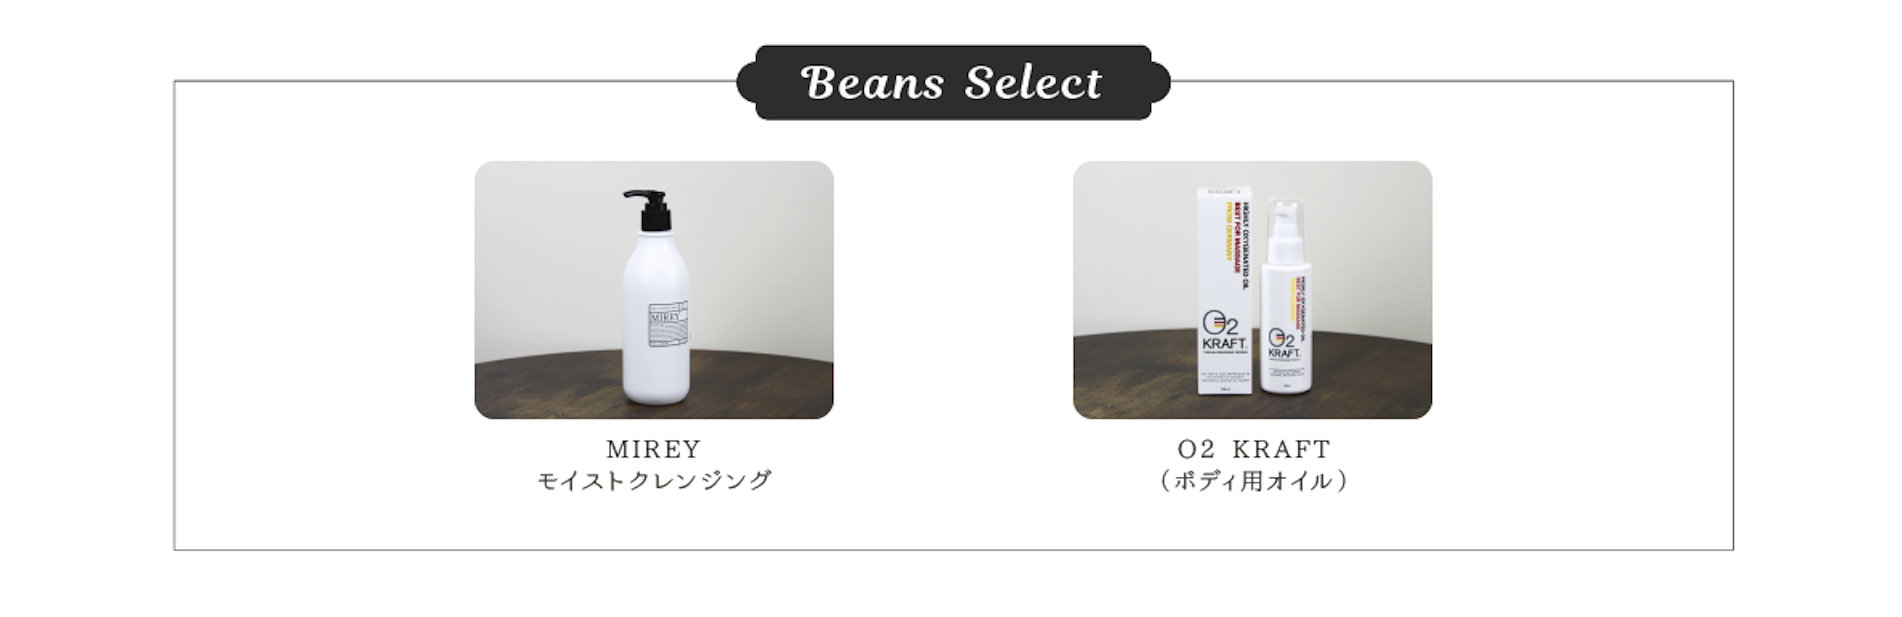 Beans Select